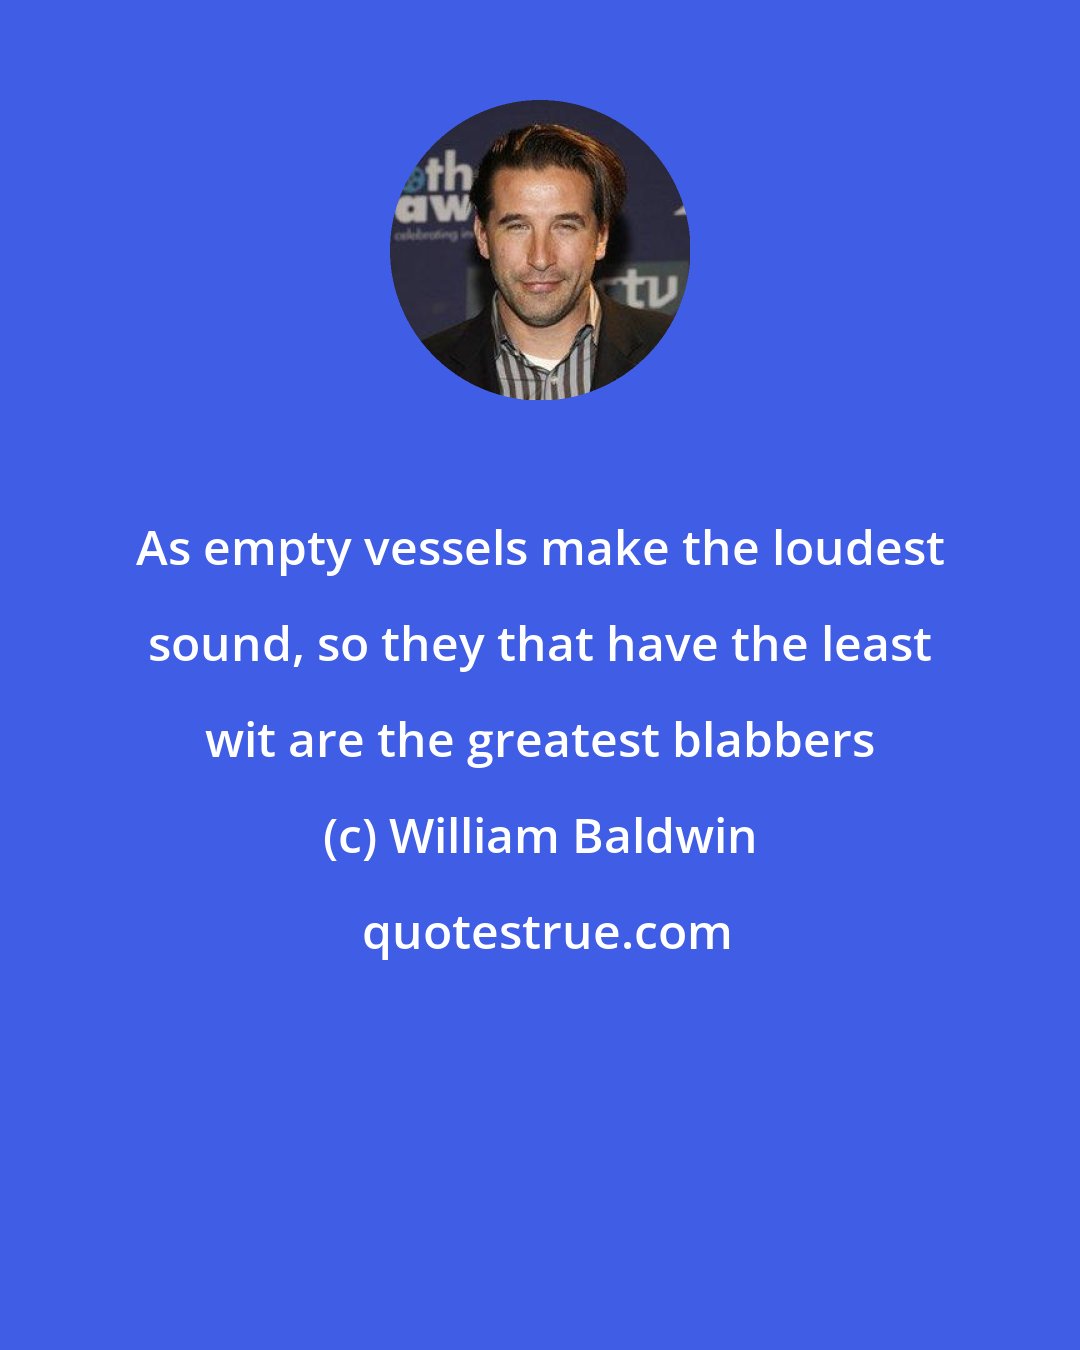 William Baldwin: As empty vessels make the loudest sound, so they that have the least wit are the greatest blabbers